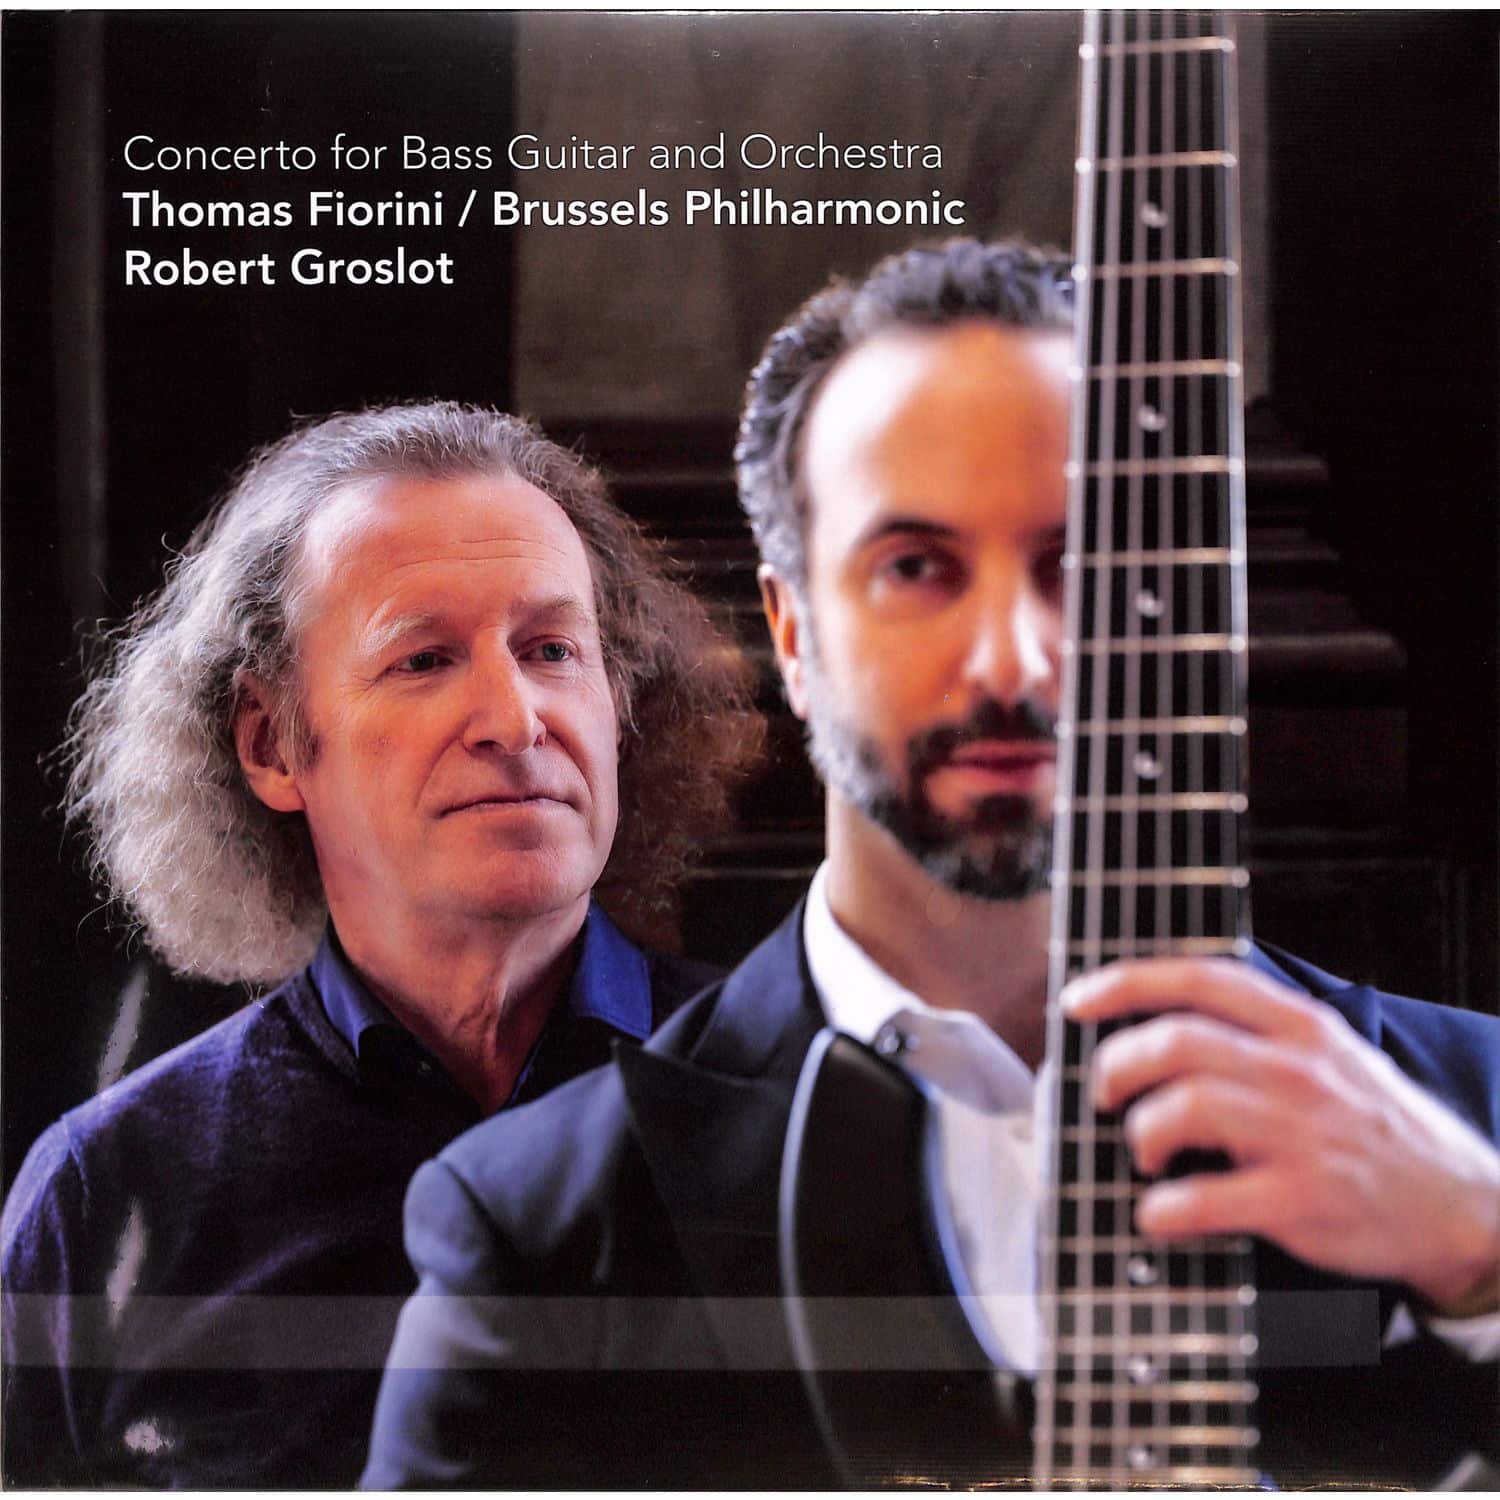 Robert Groslot / Thomas Fiorini / Brussels Philharmonic - CONCERTO FOR BASS GUITAR AND ORCHESTRA 